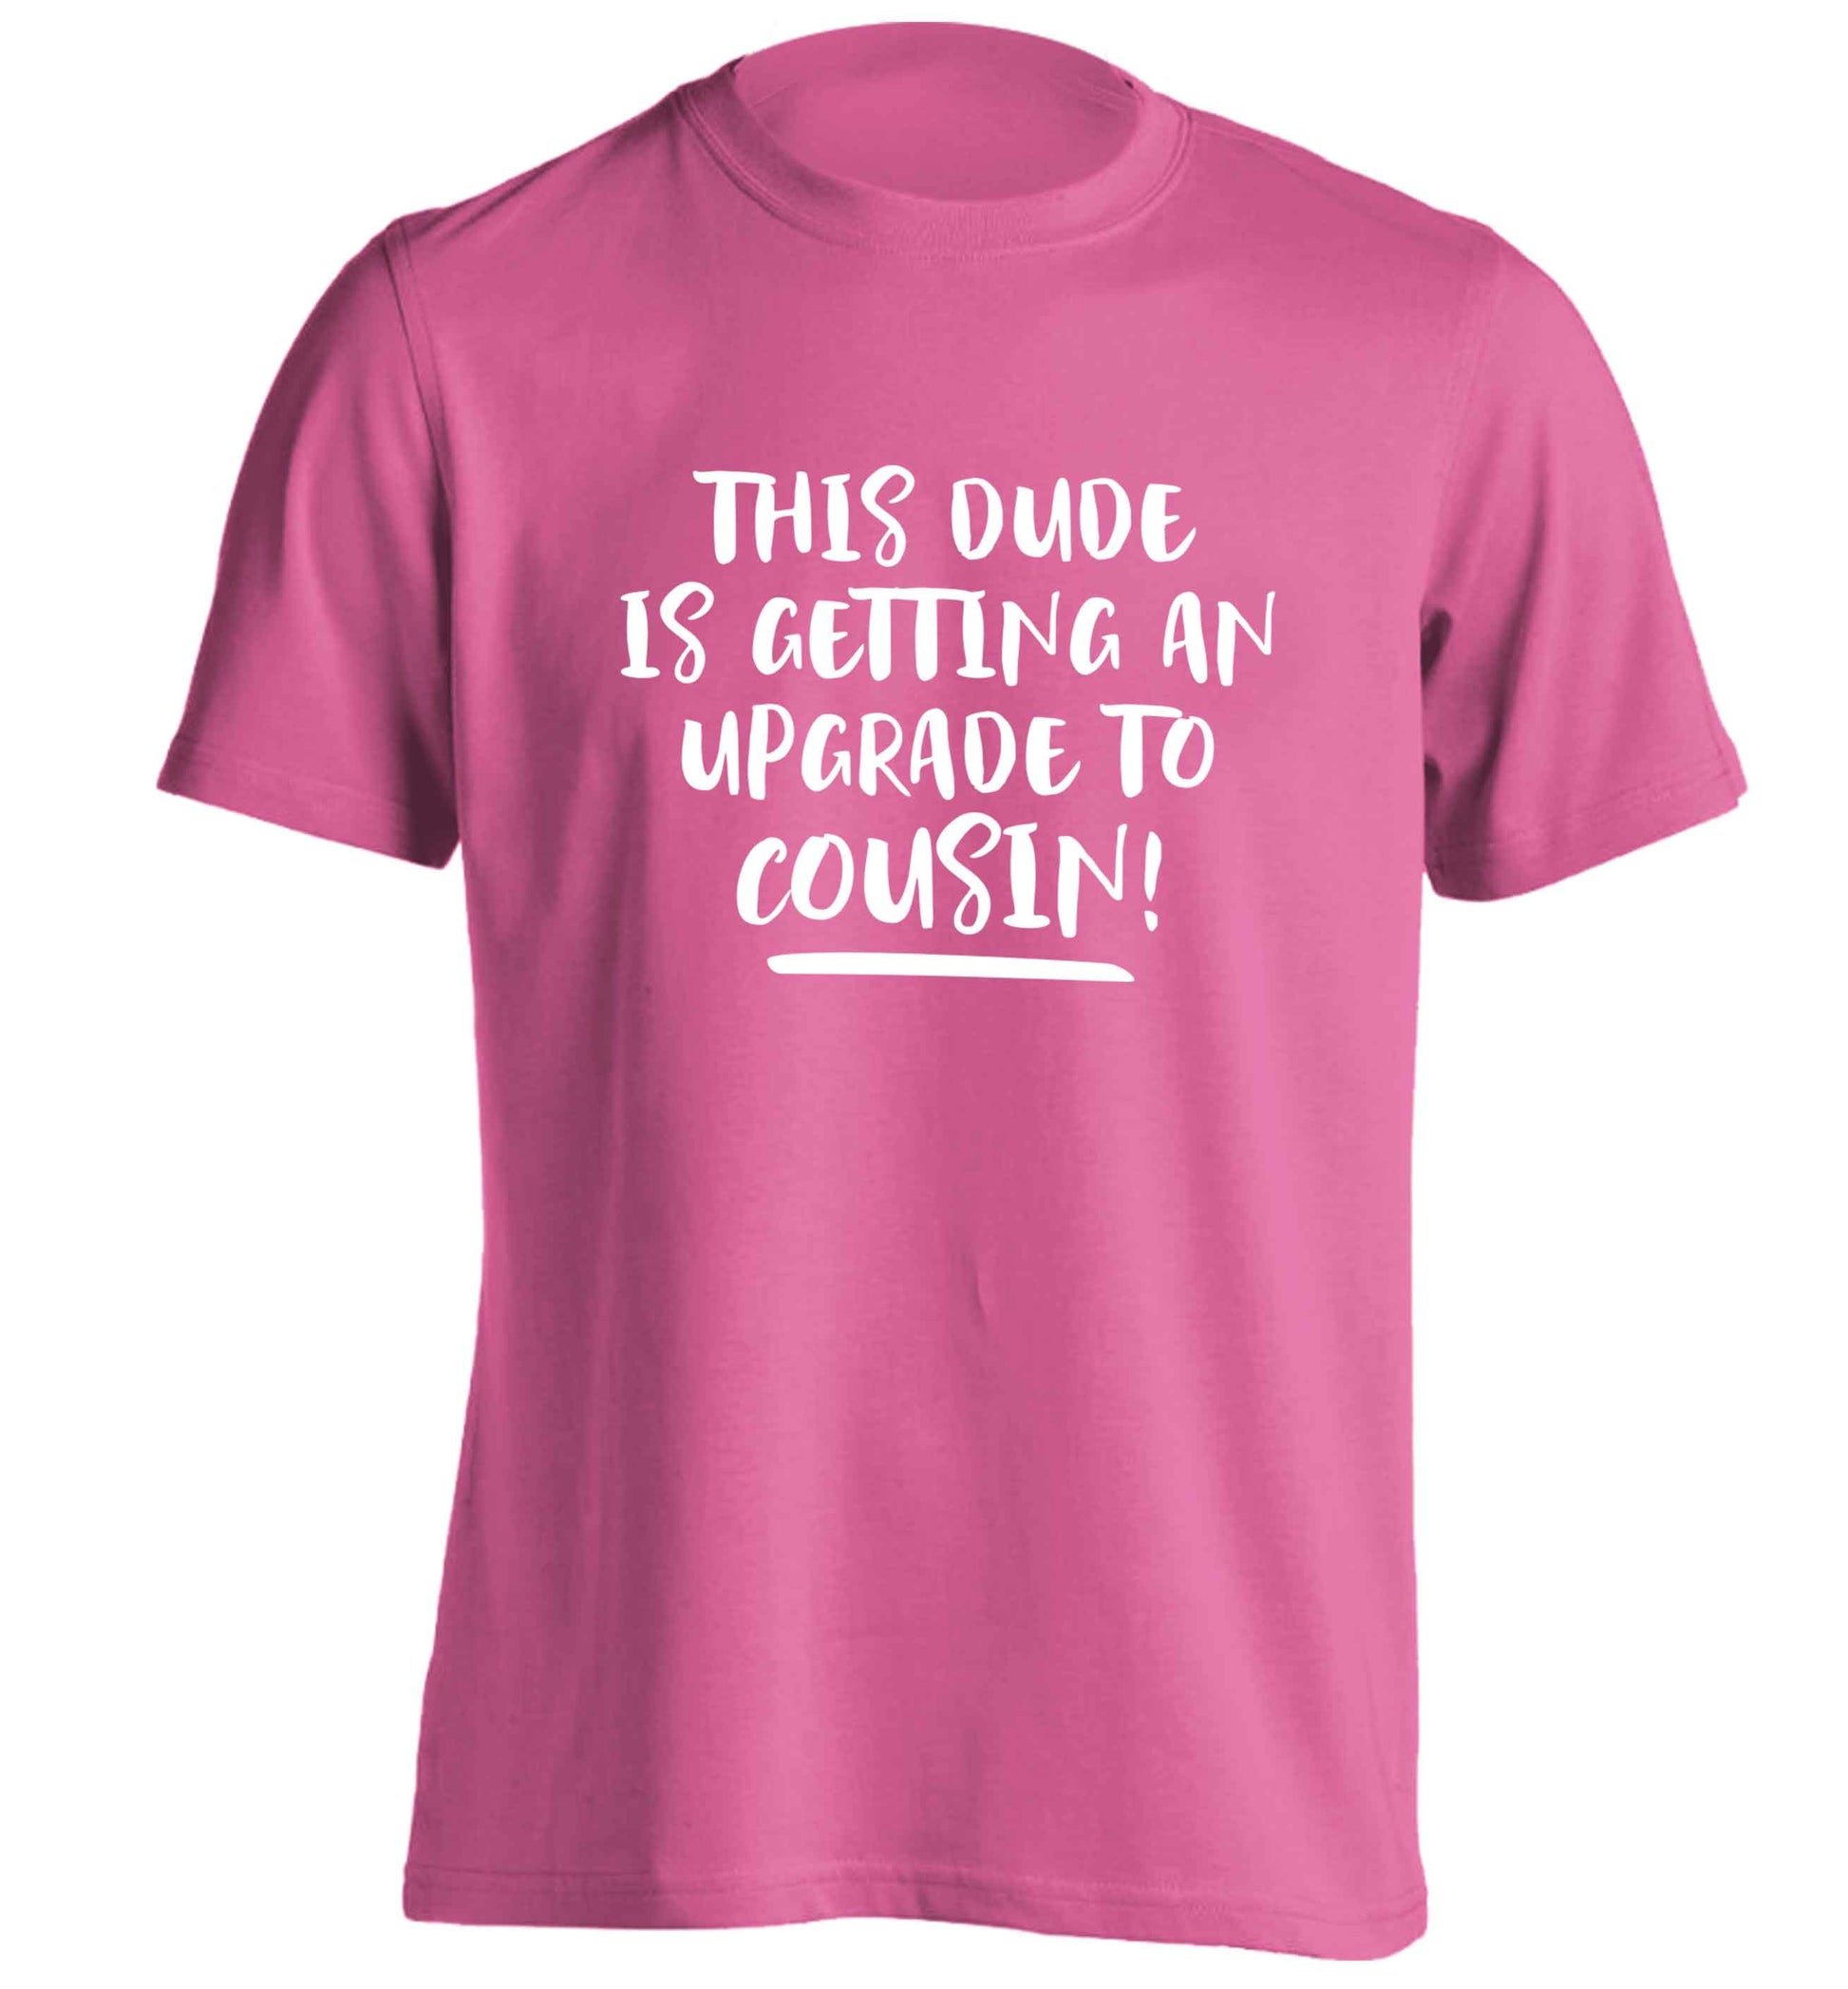 This dude is getting an upgrade to cousin! adults unisex pink Tshirt 2XL